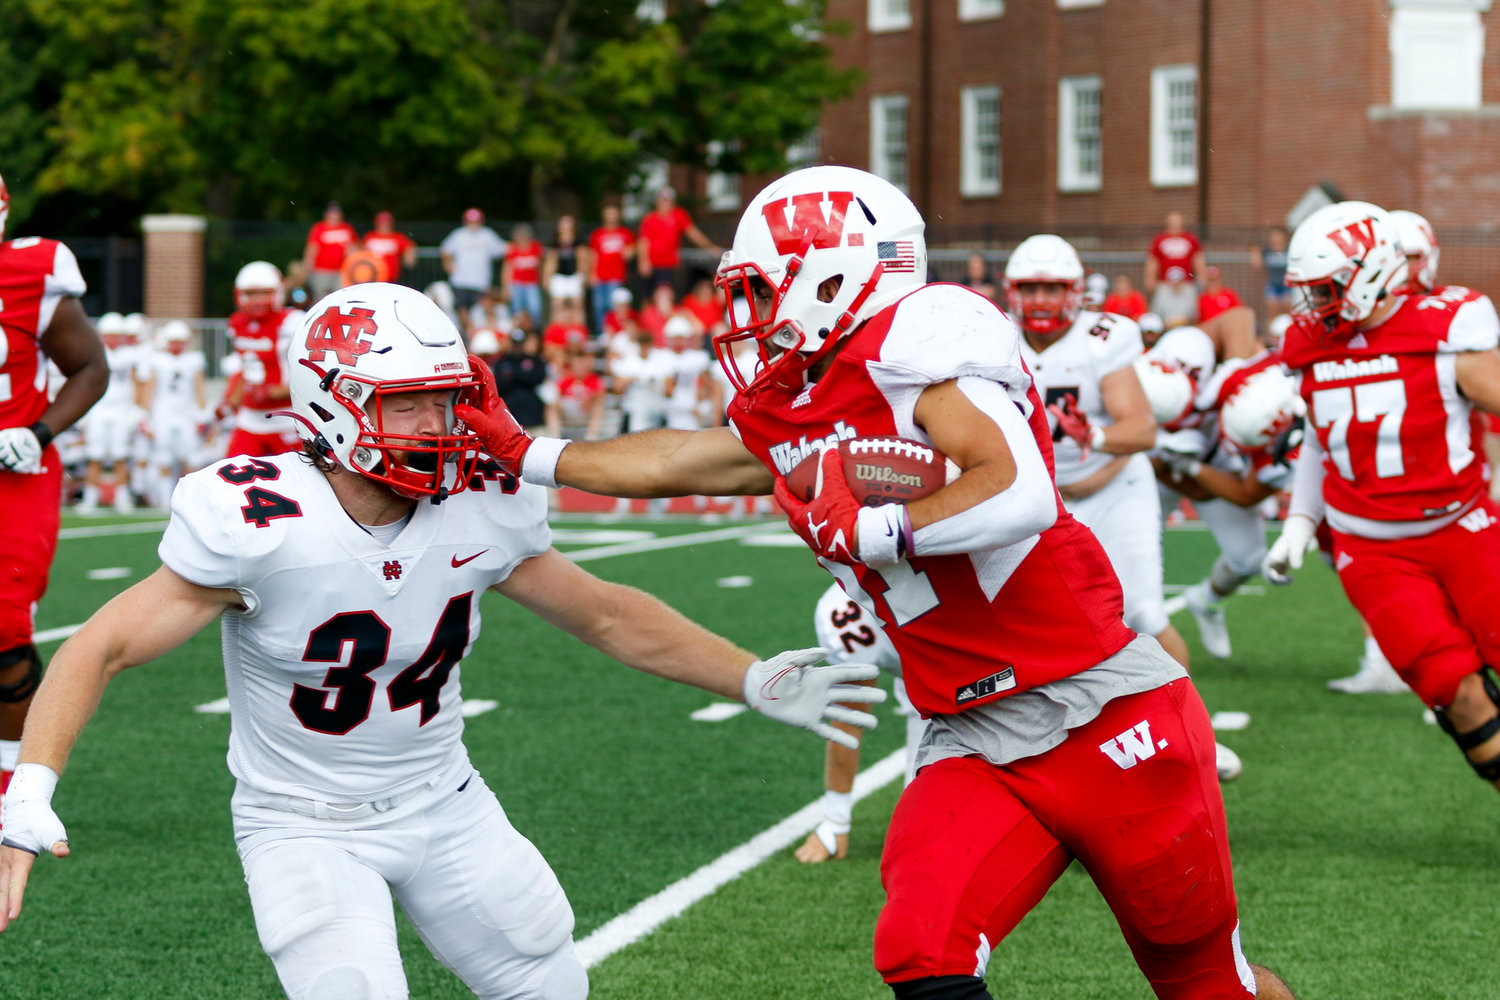 Donavon Snyder had one of the two touchdowns for the Little Giants in their 56-12 loss agains the No. 2 ranked North Central Cardinals on Saturday.